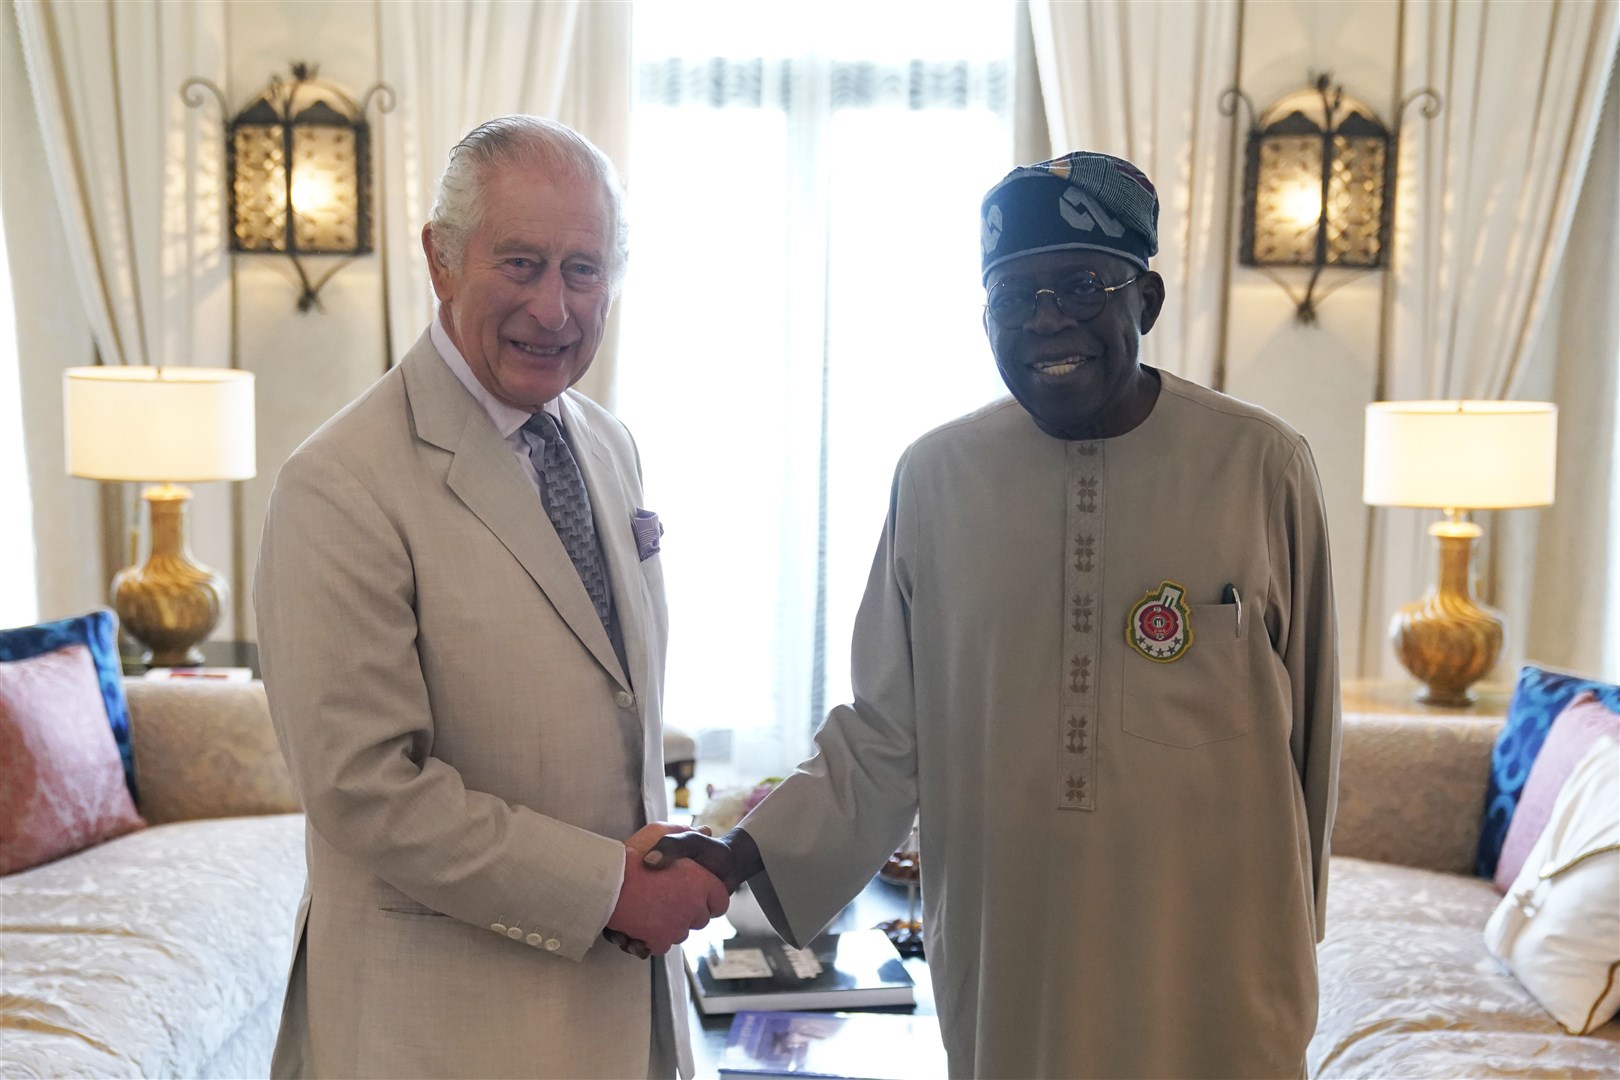 The King and Nigerian President Bola Ahmed Tinubu held a bilateral meeting at a hotel in Dubai ahead of the Cop28 summit (Andrew Matthews/PA)